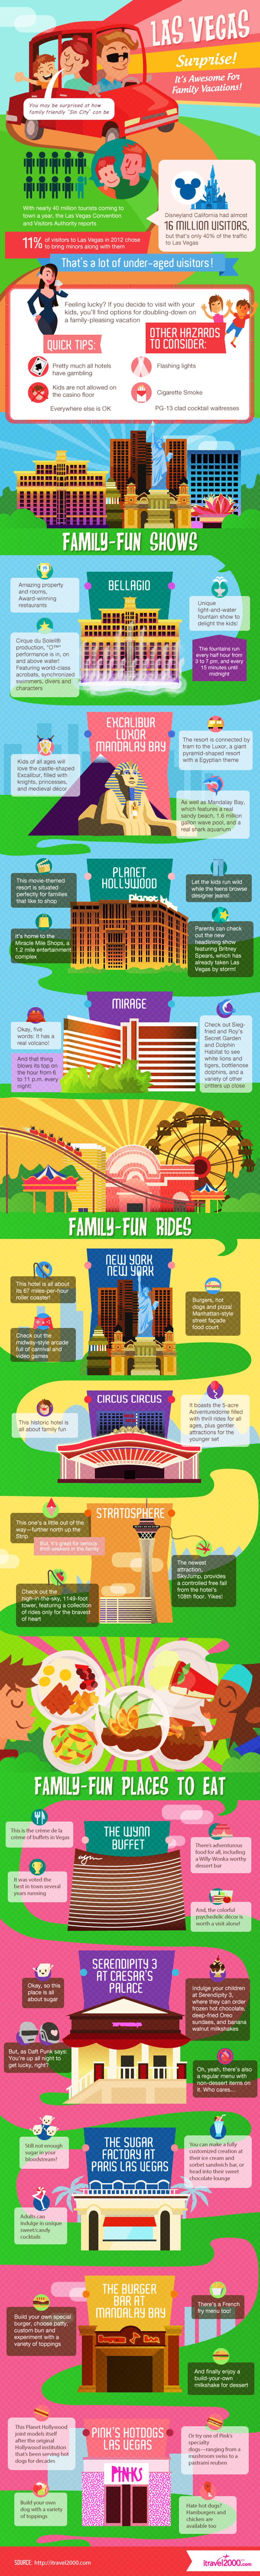 Family Vacation Guide to Las Vegas - Travel infographic